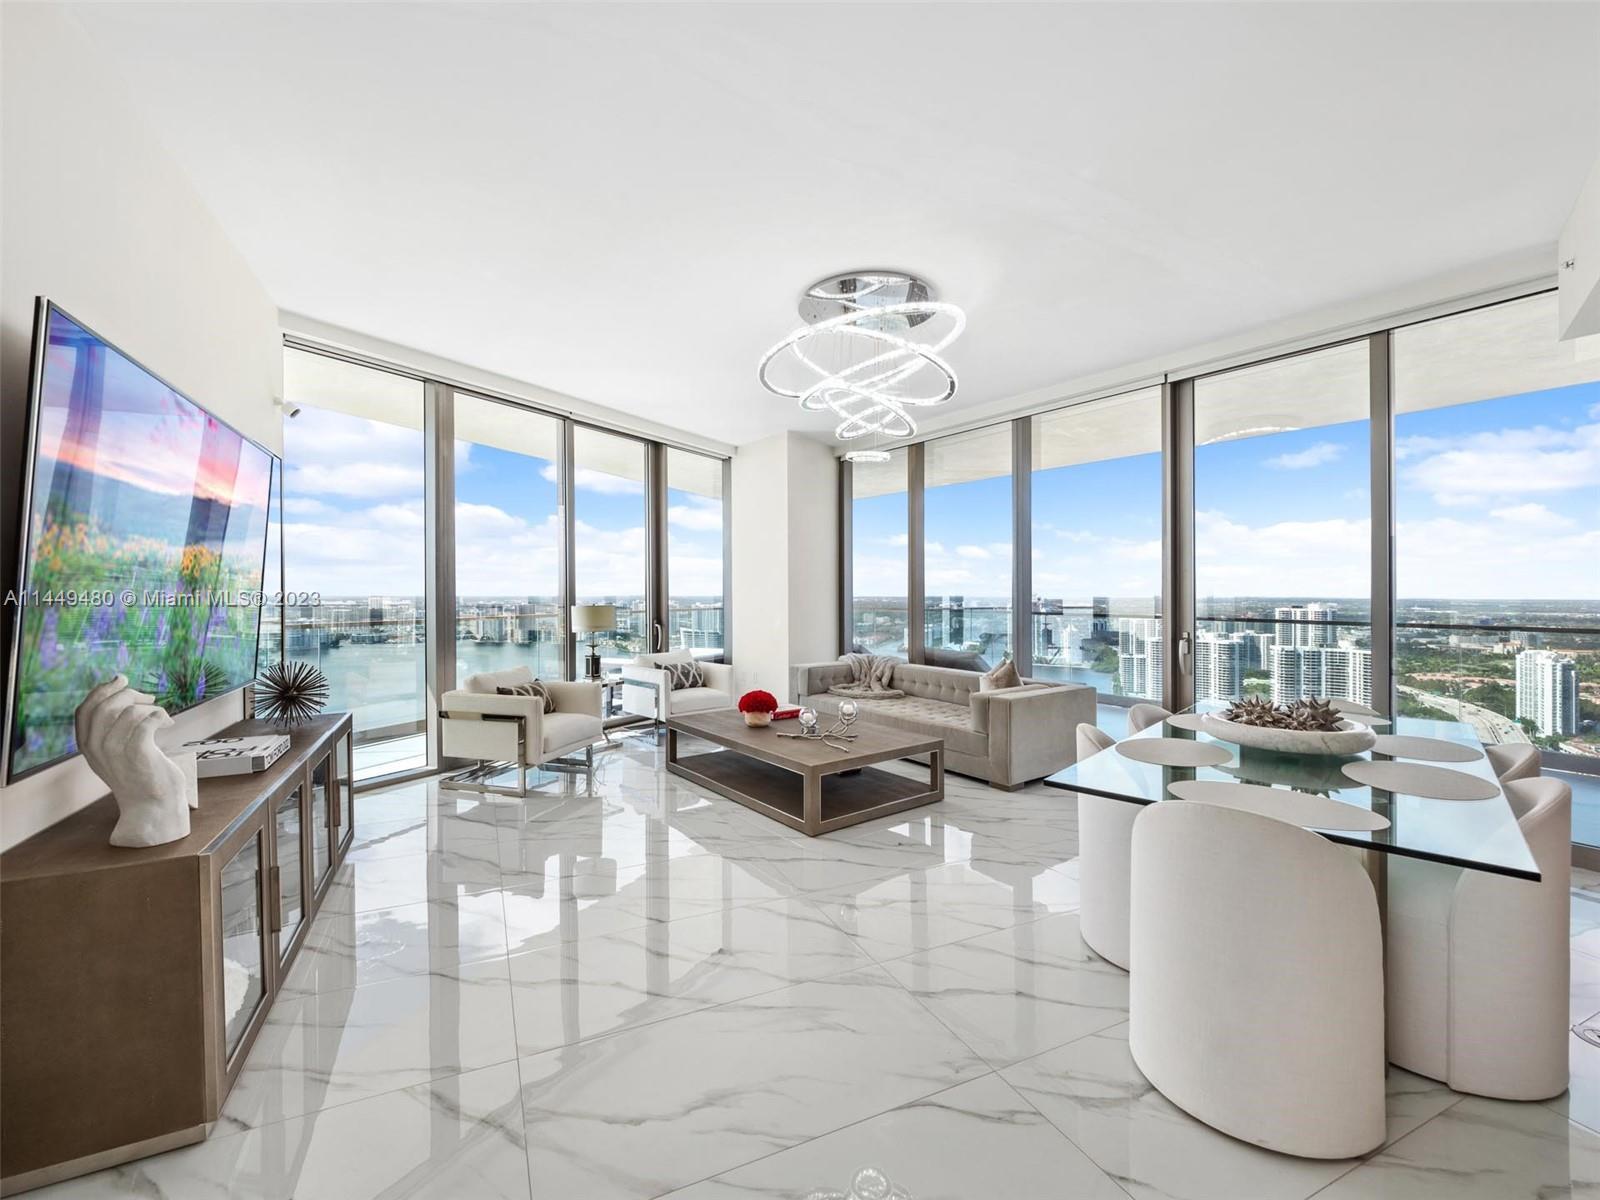 Stunning beachfront gem in Sunny Isles at the exclusive Residences by Armani Casa. This two-bedroom,